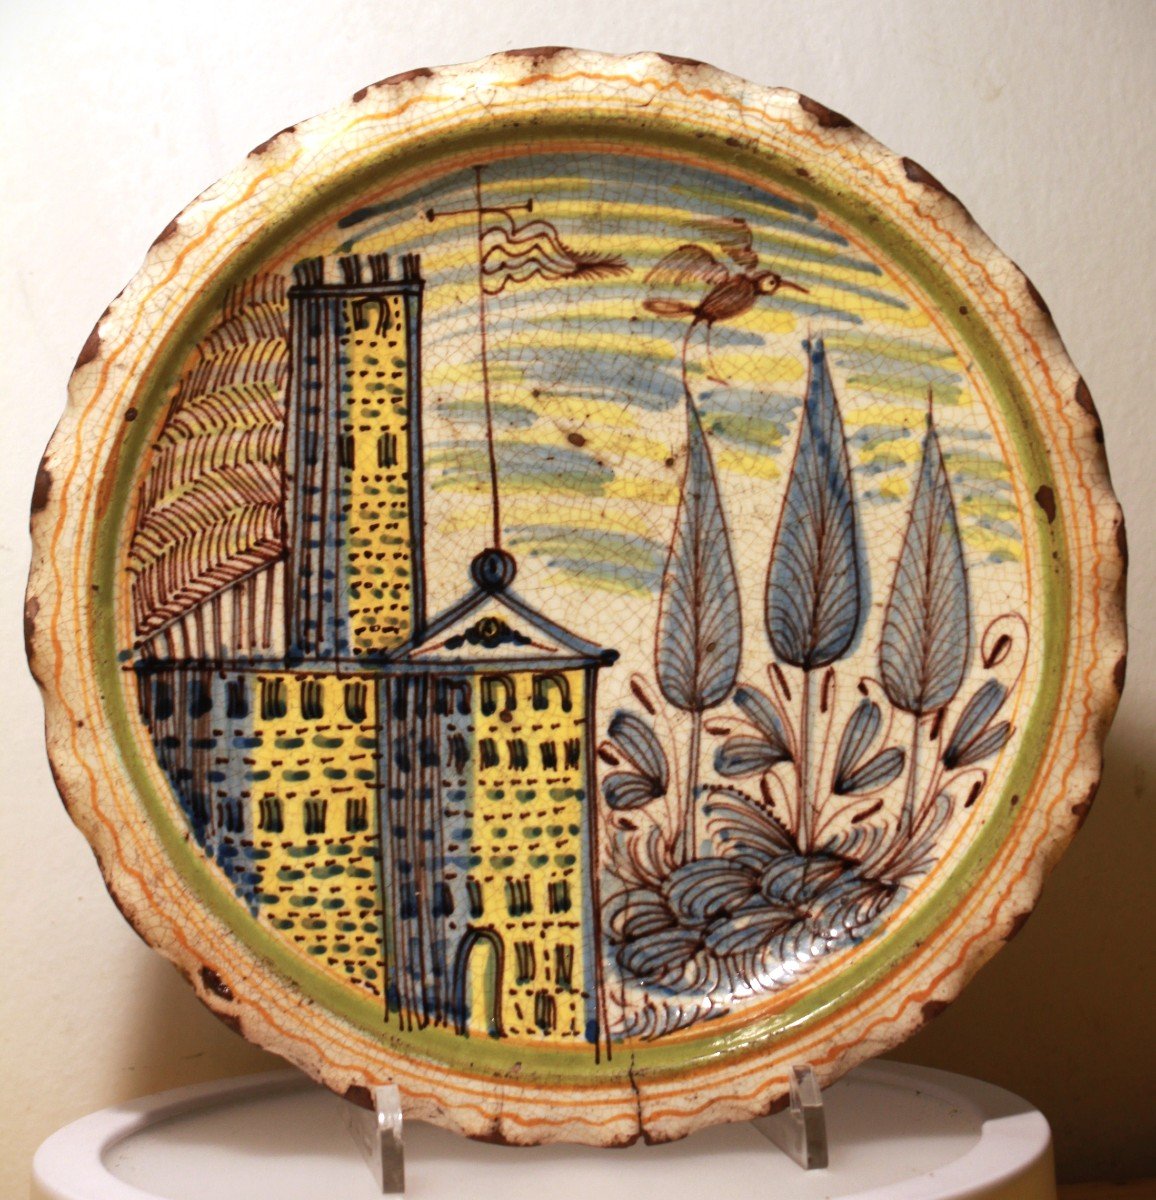  Riser Dish With Landscape Decoration, Polychrome Faience, 17th Century.